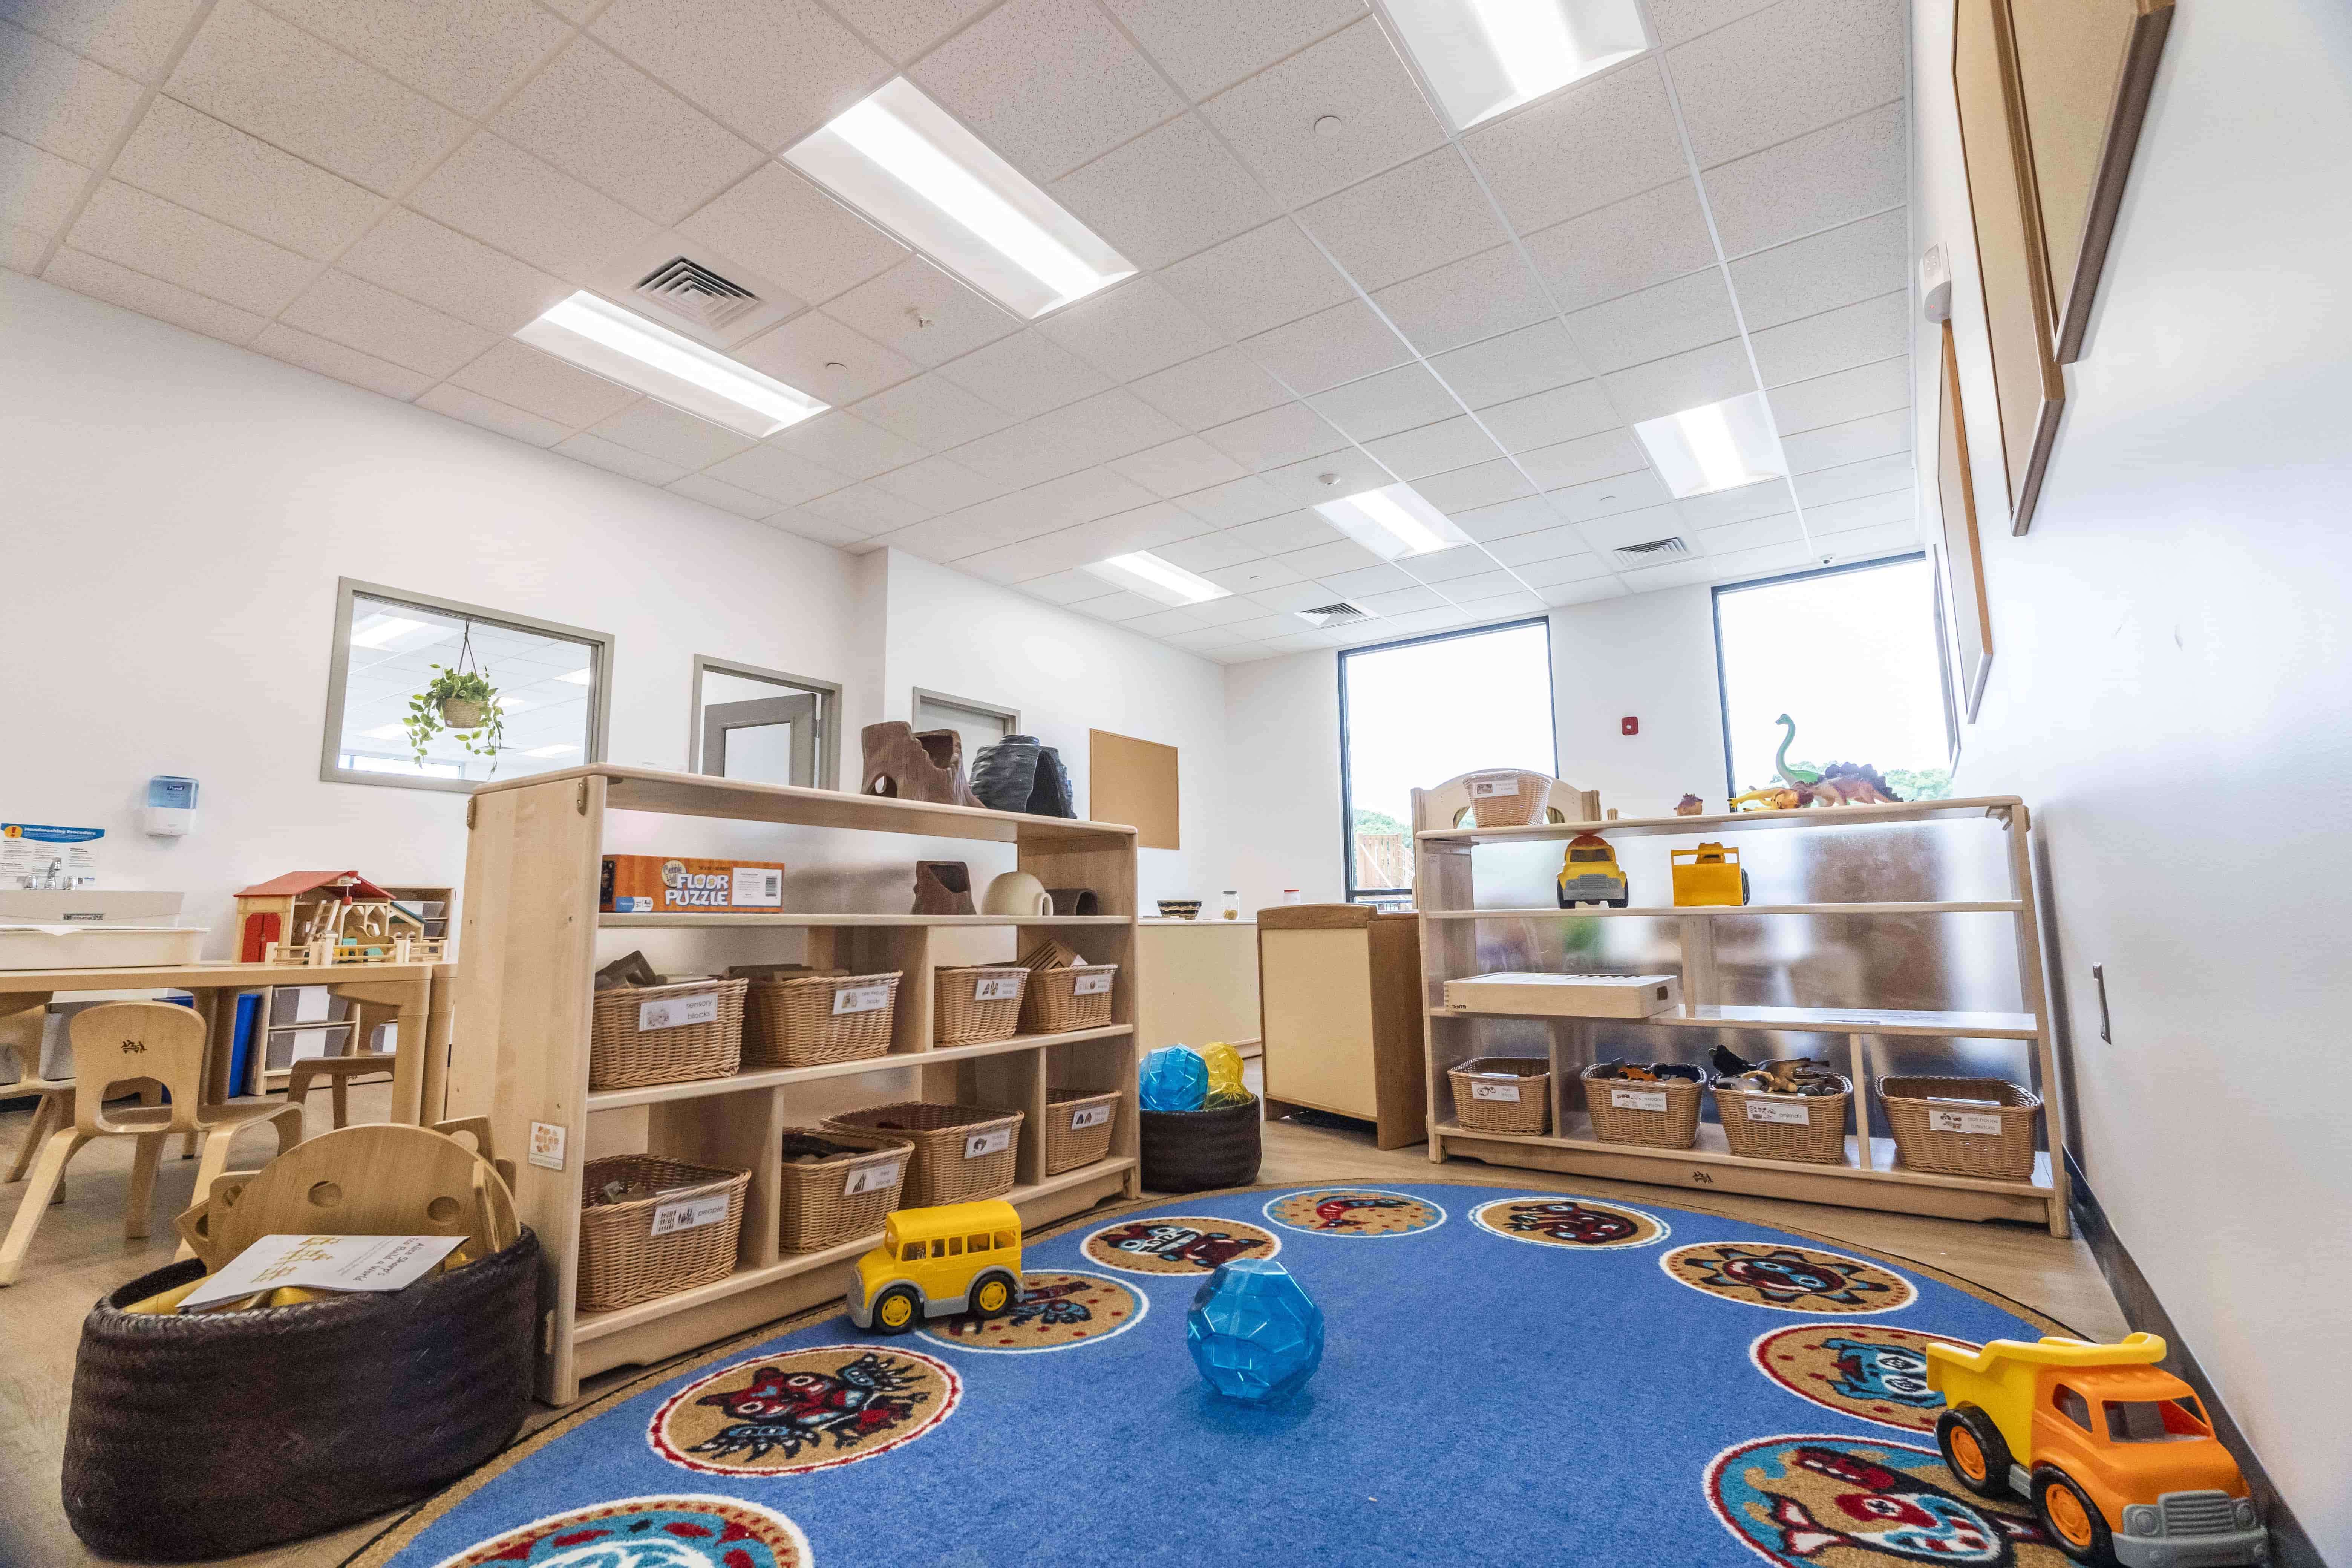 BrightPath's learning spaces with natural materials, promoting interactive exploration in daycare.